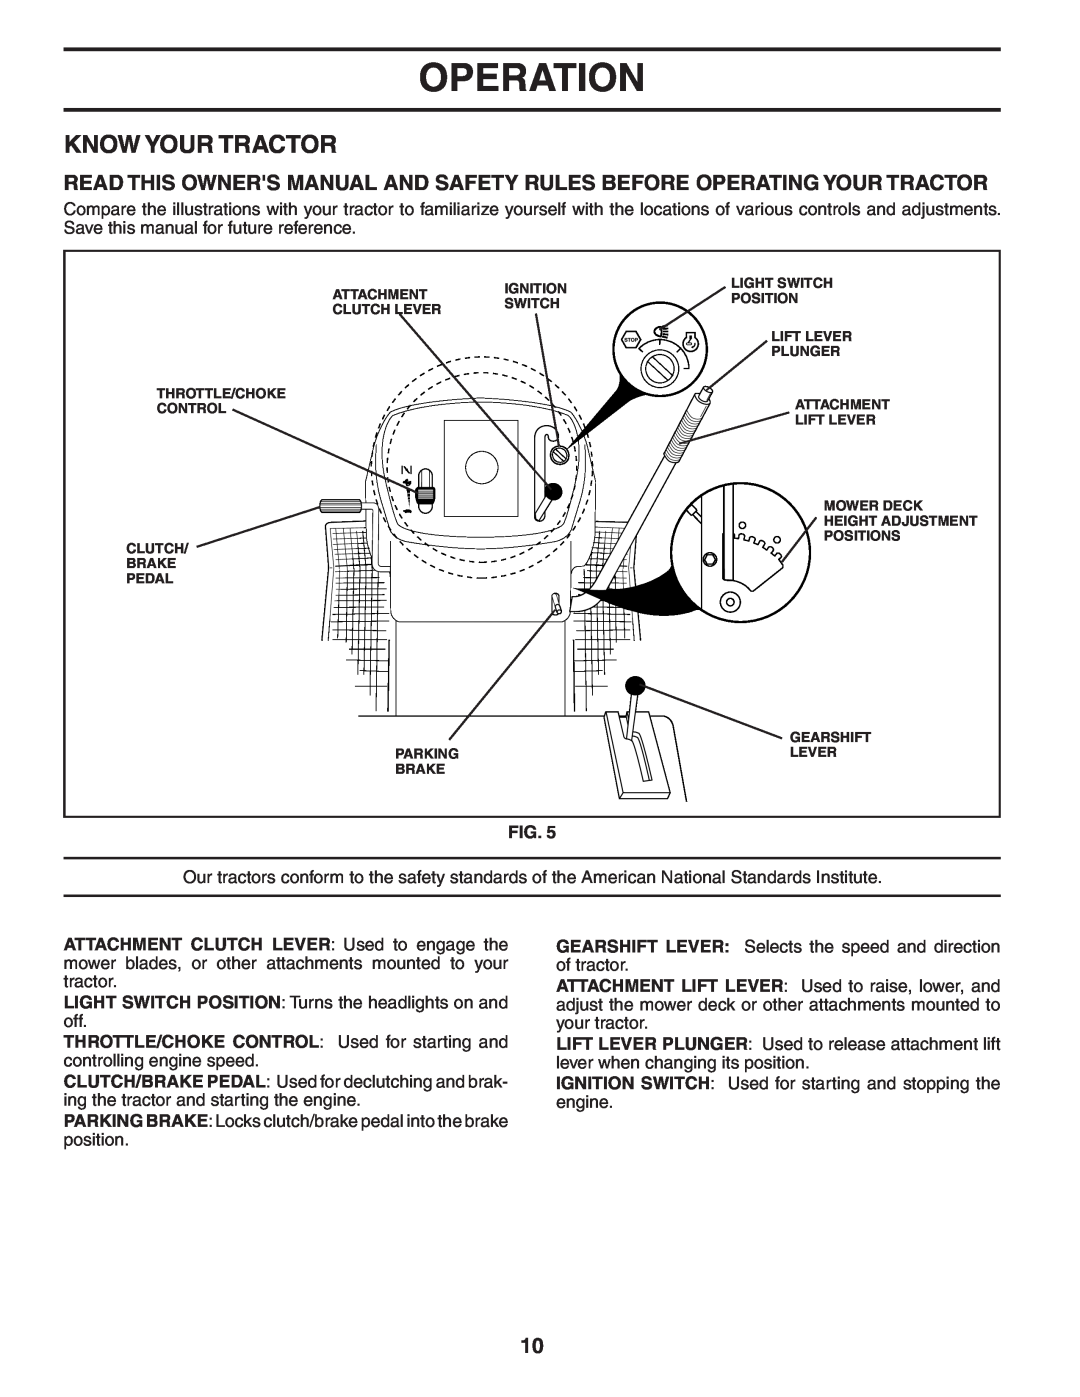 Husqvarna LT1538 owner manual Know Your Tractor, Operation 